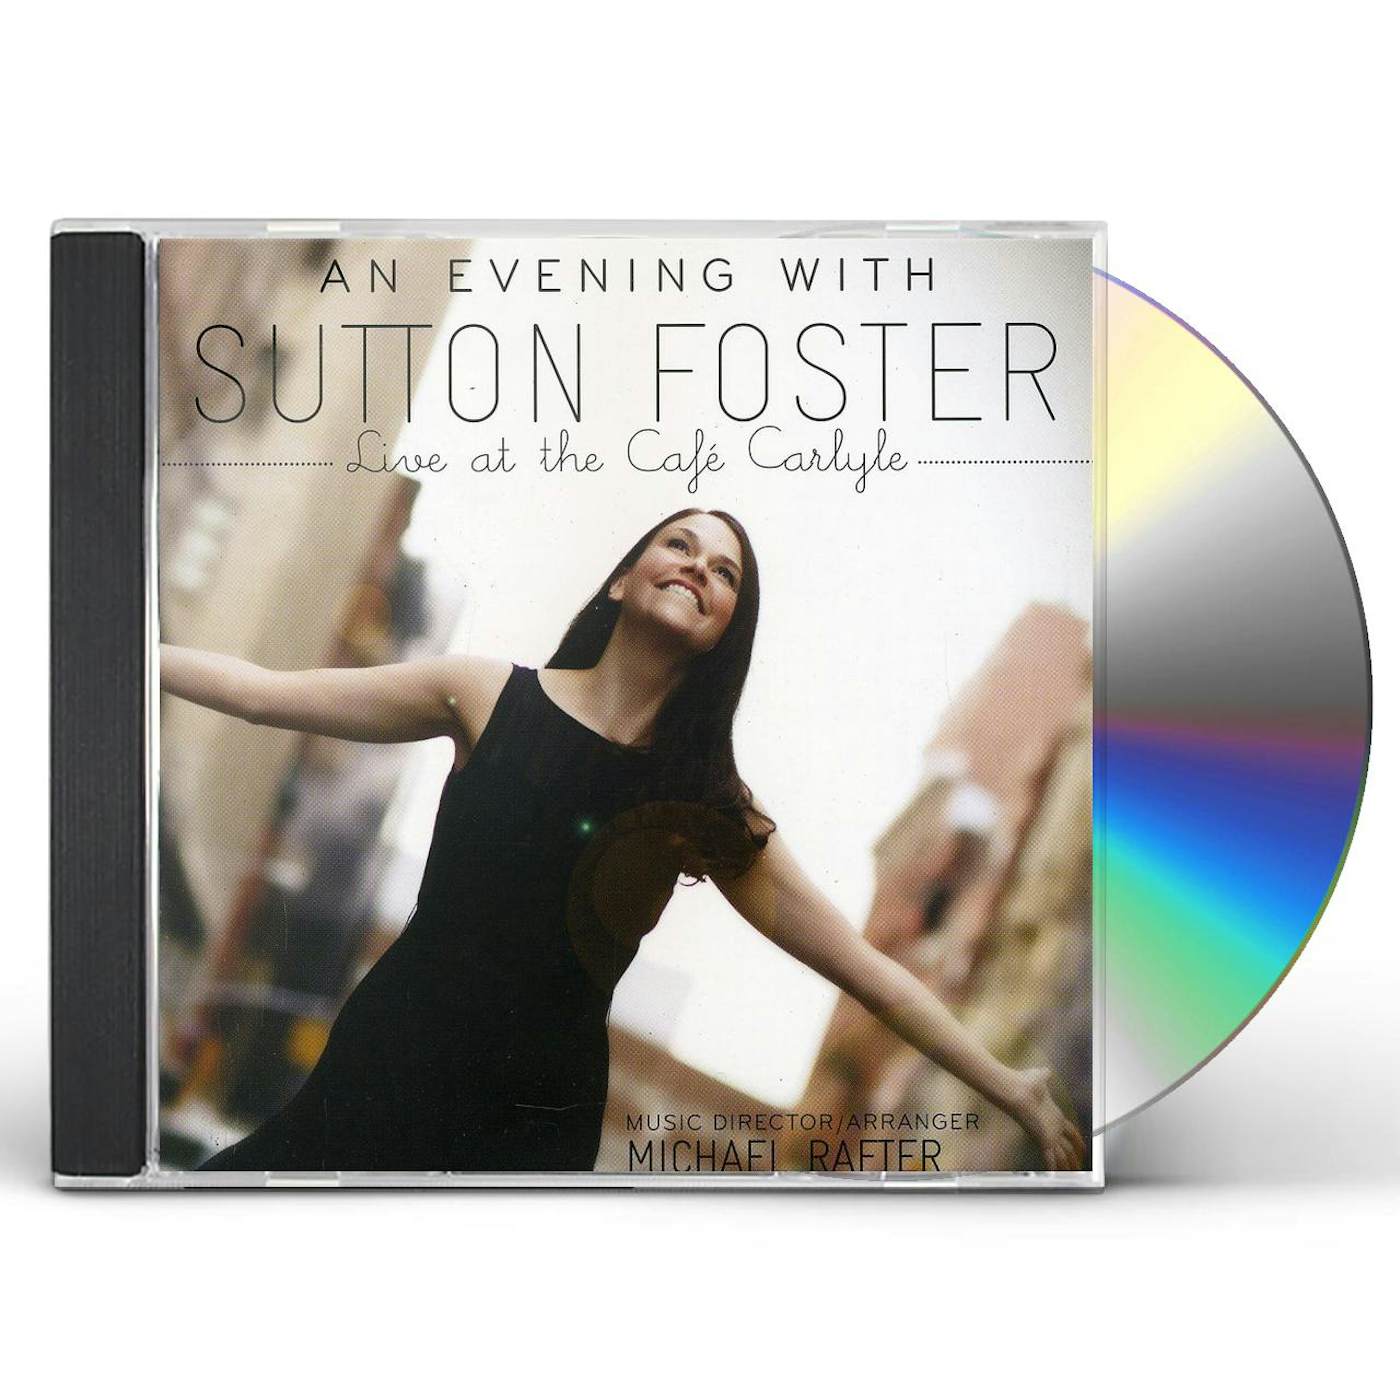 AN EVENING WITH SUTTON FOSTER: LIVE AT THE CAFE CD